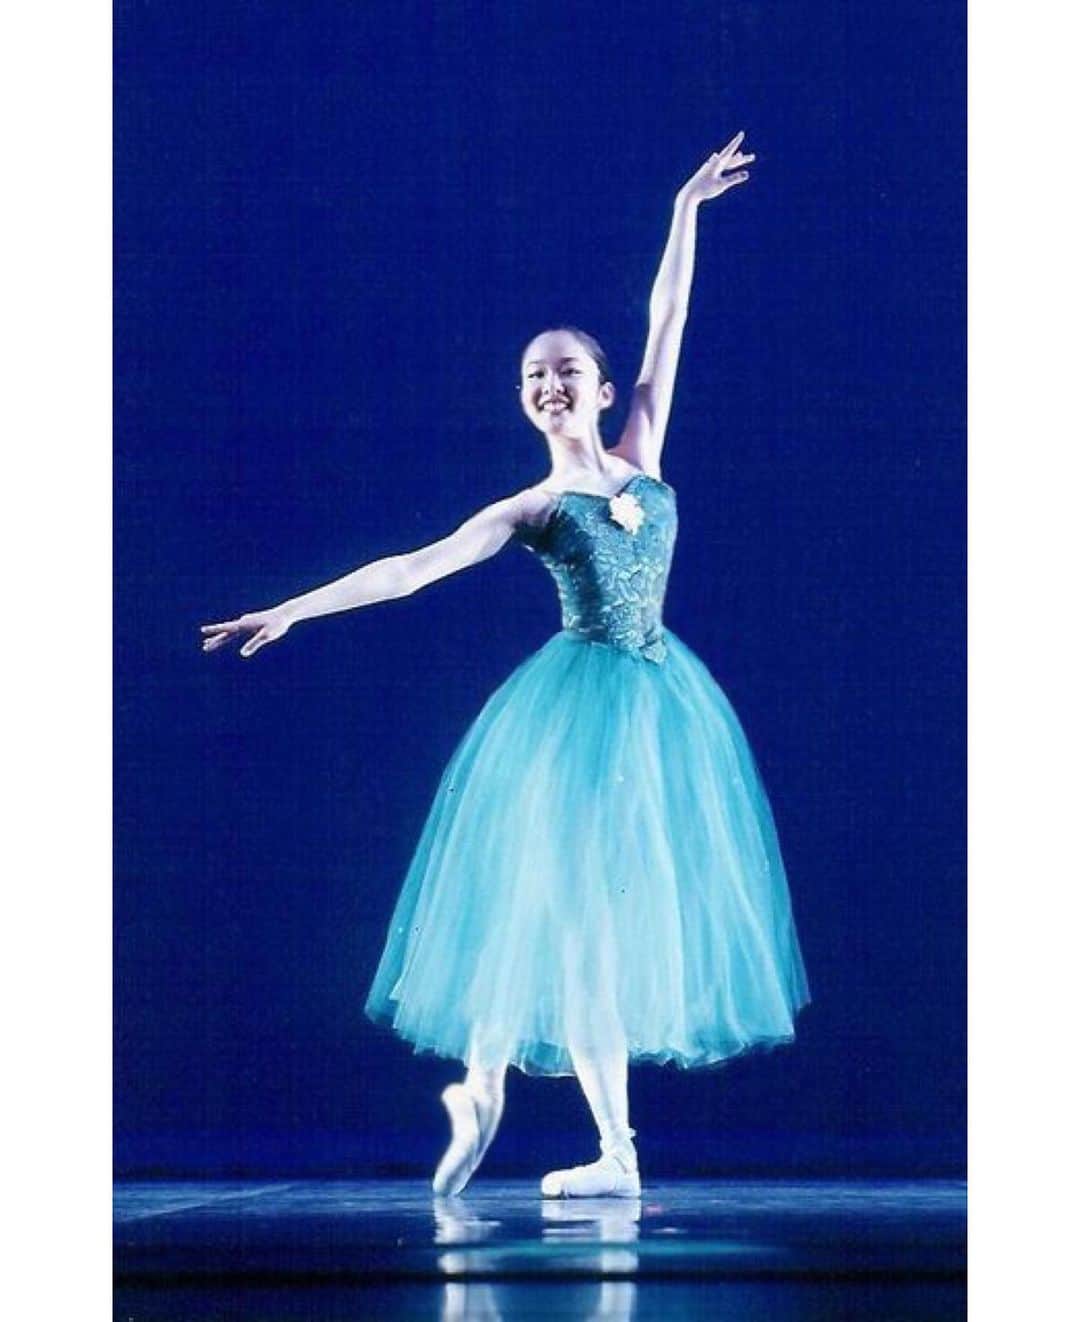 メロディー・モリタさんのインスタグラム写真 - (メロディー・モリタInstagram)「”Save your tears for the stage." These words are by my dearest ballet teacher, and I miss her so much.  My lovely friend and gorgeous dancer @kyliesheaxo and I were in the same ballet company under artistic director Mrs. Stander years ago, and Kylie sent me a very heartwarming gift in memory of her.❤️  Kylie wrote a children's book dedicated to Mrs. Stander, and after asking her followers to help make it come to life, 74 artists around the world (ranging from age 6 to 75 from 25 countries) came together to complete the piece.✨ The beautiful artwork and relatable story truly touched my heart and brought back so many memories.😌🩰  Slide 2 is from a performance back when I was 11 years old. It was a piece which I was selected to join and dance with the senior company members including Kylie! I remember being thrilled to be able to dance together, but I was also nervous and worried for the big stage. I wasn't confident dancing en pointe yet at the time and was struggling with a fast-paced challenging solo I was given. But I remember how Mrs. Stander, Kylie, and all the dancers would be so encouraging by repeatedly telling me "you're doing great, darling!" and "you've got this!" I wasn't able to dance it as perfectly as I wished, but I certainly enjoyed dancing it with all my heart.  Even though Mrs. Stander has left us, her legacy continues to live on. Whenever I'm going through a rough time, I listen to her voice in my head to lift me up. Thank you Kylie for continuing to inspire and spread the "Save Your Tears For The Stage" mantra worldwide.🩰💖✨  * * *  ”Save your tears for the stage." 私の幼い頃のバレエディレクターでロイヤル・バレエ団出身の、もう亡くなられてしまったスタンダー先生の言葉です。 「生きていれば誰しも大変な事があるけれど、舞台に立つ時だけは最高の笑顔で楽しんで、舞台が終わってから涙を流しなさい」という意味が込められています。  バレエカンペニーの先輩だったカイリー (@kyliesheaxo)から、そんなスタンダー先生の言葉を綴った絵本とアパレル、そして手紙が自宅に届きました🎀  絵本はカイリーがフォロワーさん達に呼びかけ、年齢・性別・人種問わず、世界25カ国の方々から届いたイラストを繋げて完成させたものです。  2枚目の動画は、私が11歳の時にカイリーと年上のお姉さん達に混じって作品に参加させて頂いた時の映像🎥🩰 まだトゥシューズにも慣れておらず、ハードな練習や舞台へのプレッシャーで心が折れそうな時、いっぱい泣いたこと、先生とカイリーがいつも側で励ましてくれた事、どれも大切な想い出です。  スタンダー先生からはもう直接励ましてもらうことはできませんが、彼女から頂いた教えと言葉の数々は、今でも私達を正しい方向へ導いてくれています。」1月18日 9時16分 - melodeemorita